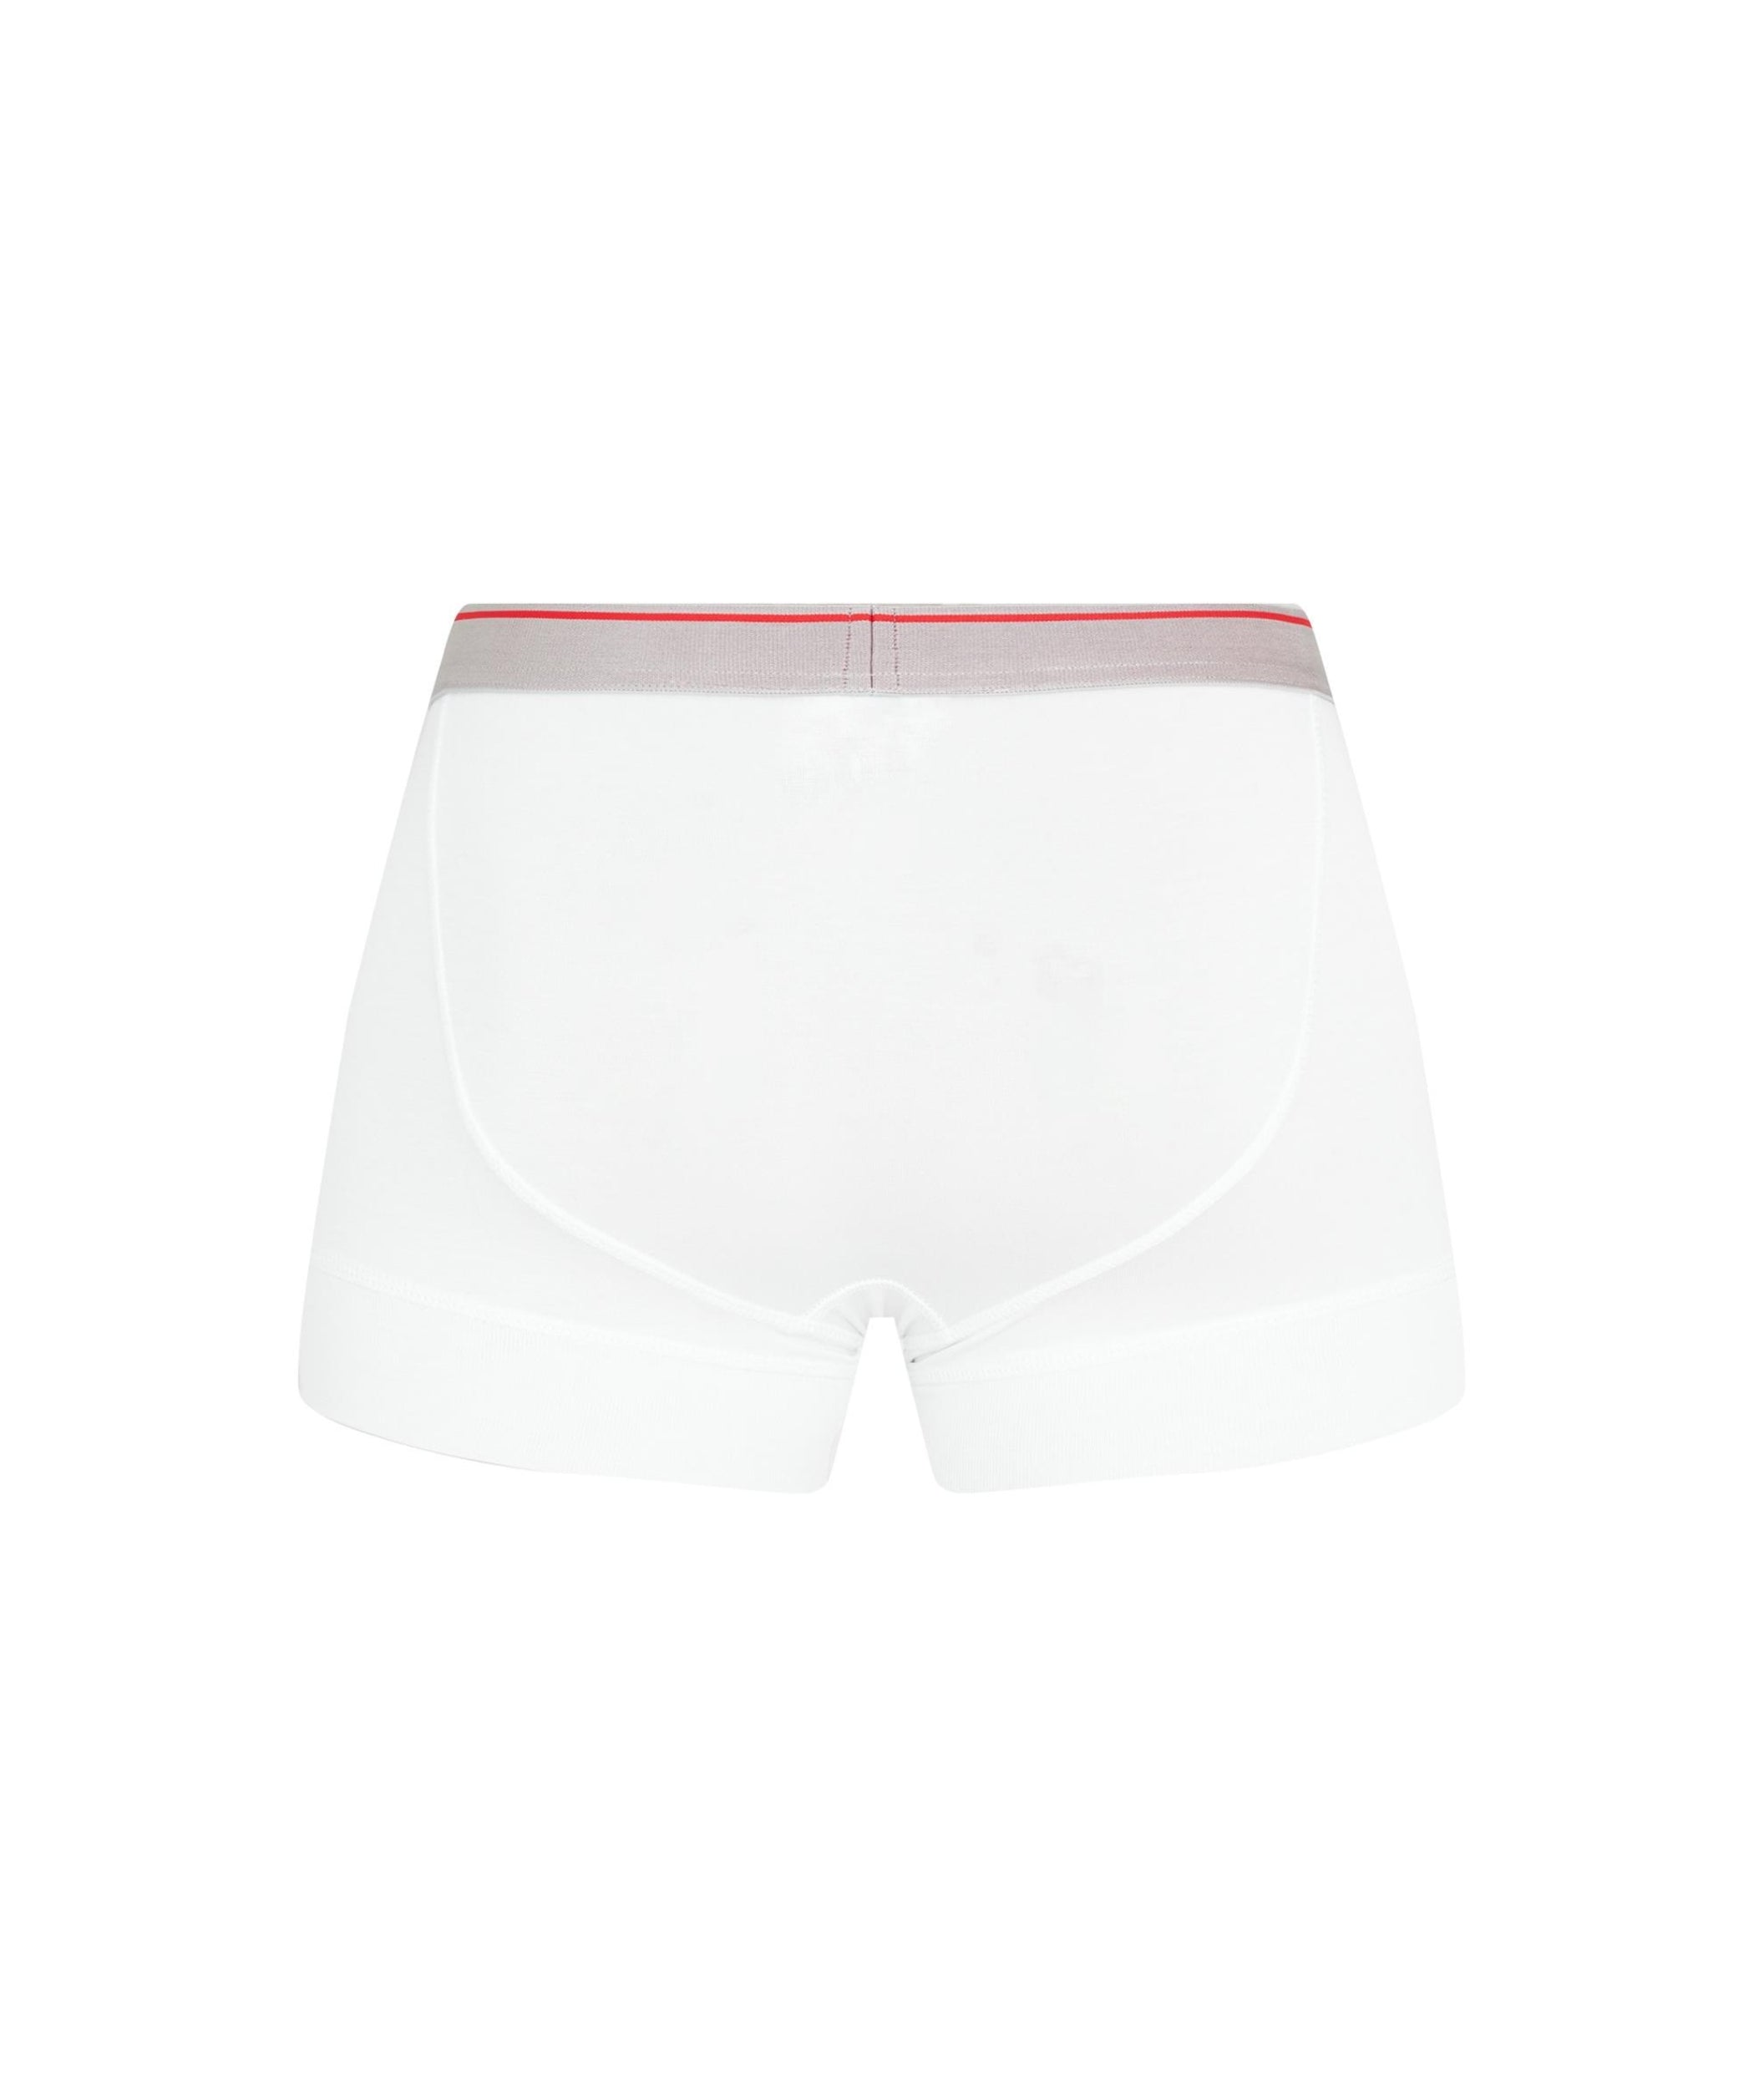 LUXURY HUB DSQUARED2 2 PACK BOXERS